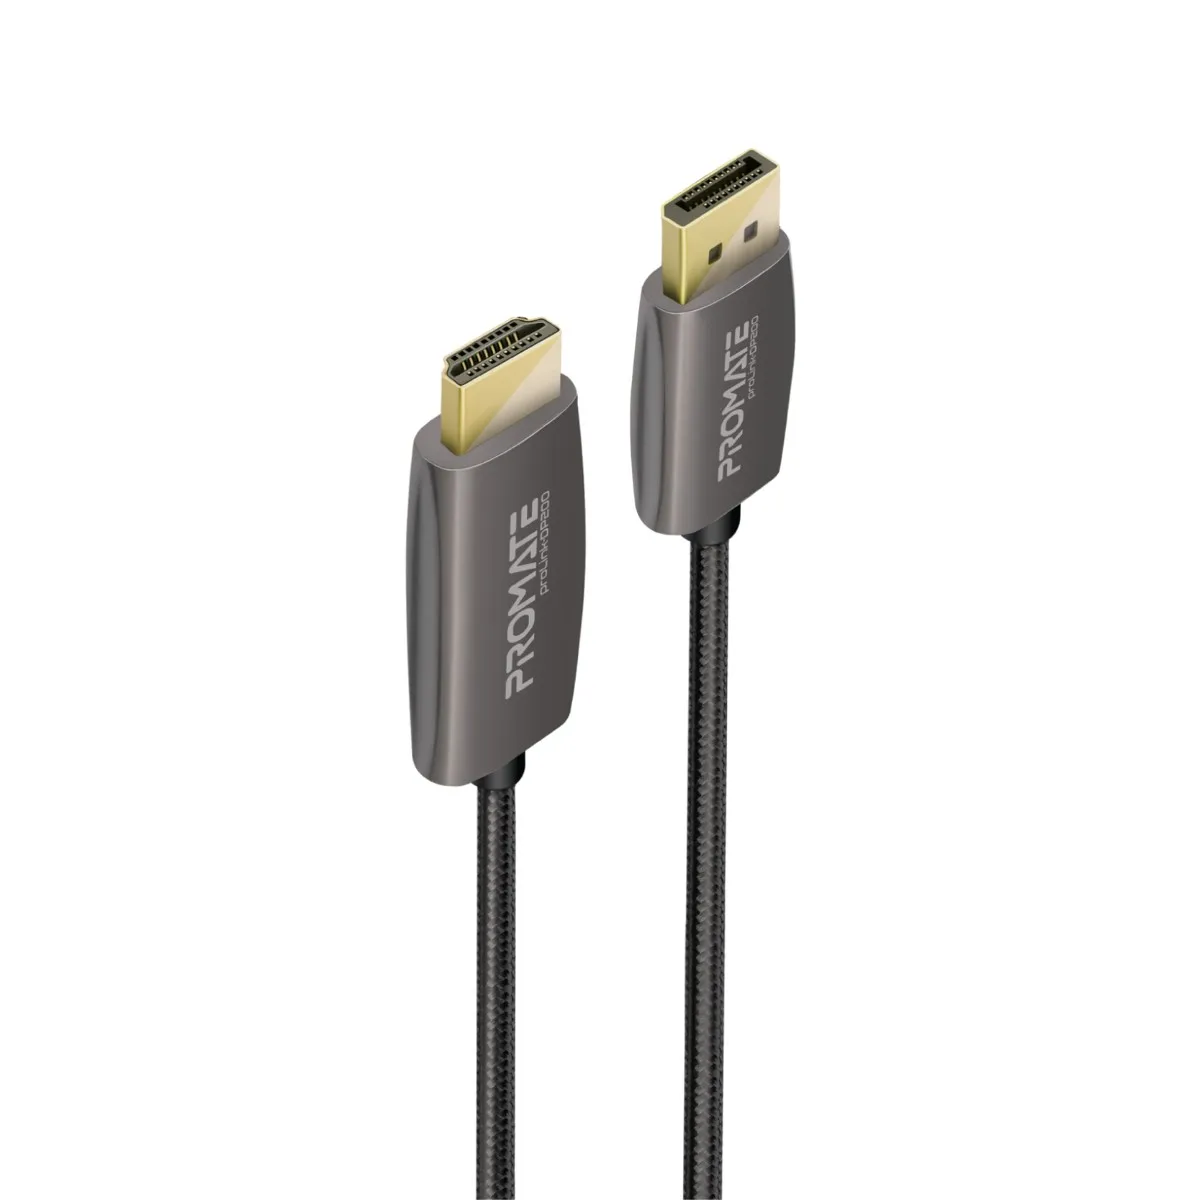 Promate DisplayPort to HDMI Cable with 4K@60Hz Display, 2m Nylon Cable and 18Gbps Transfer Speed, ProLink-DP-200